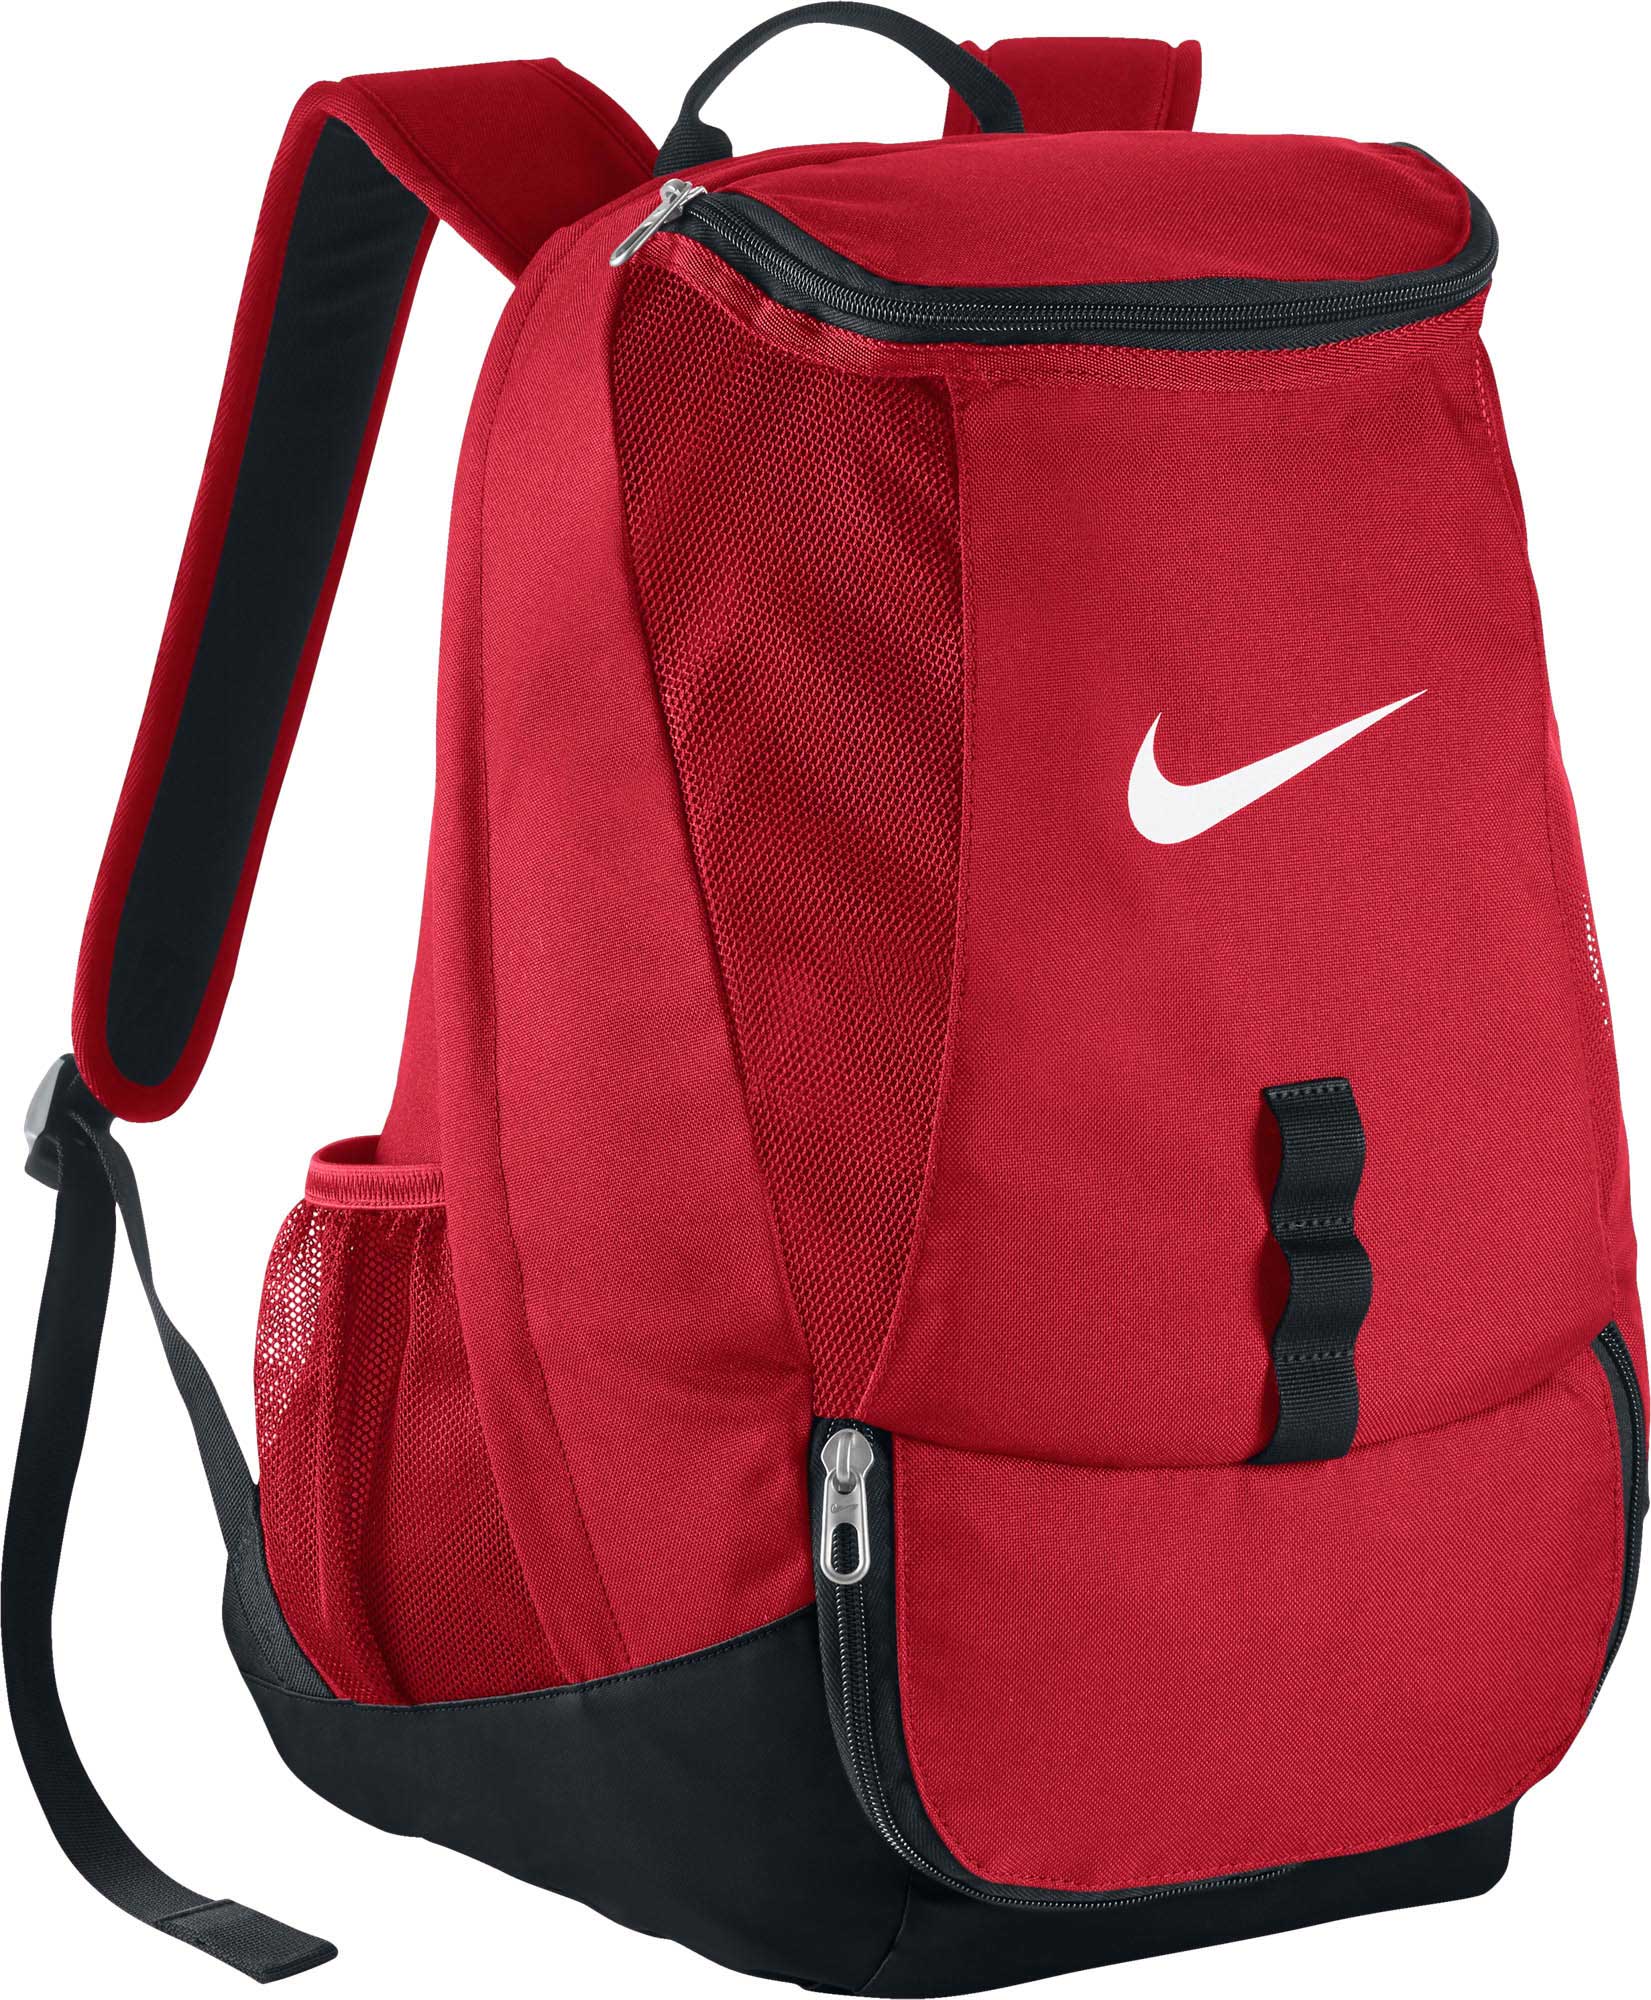 nike soccer bag with ball compartment